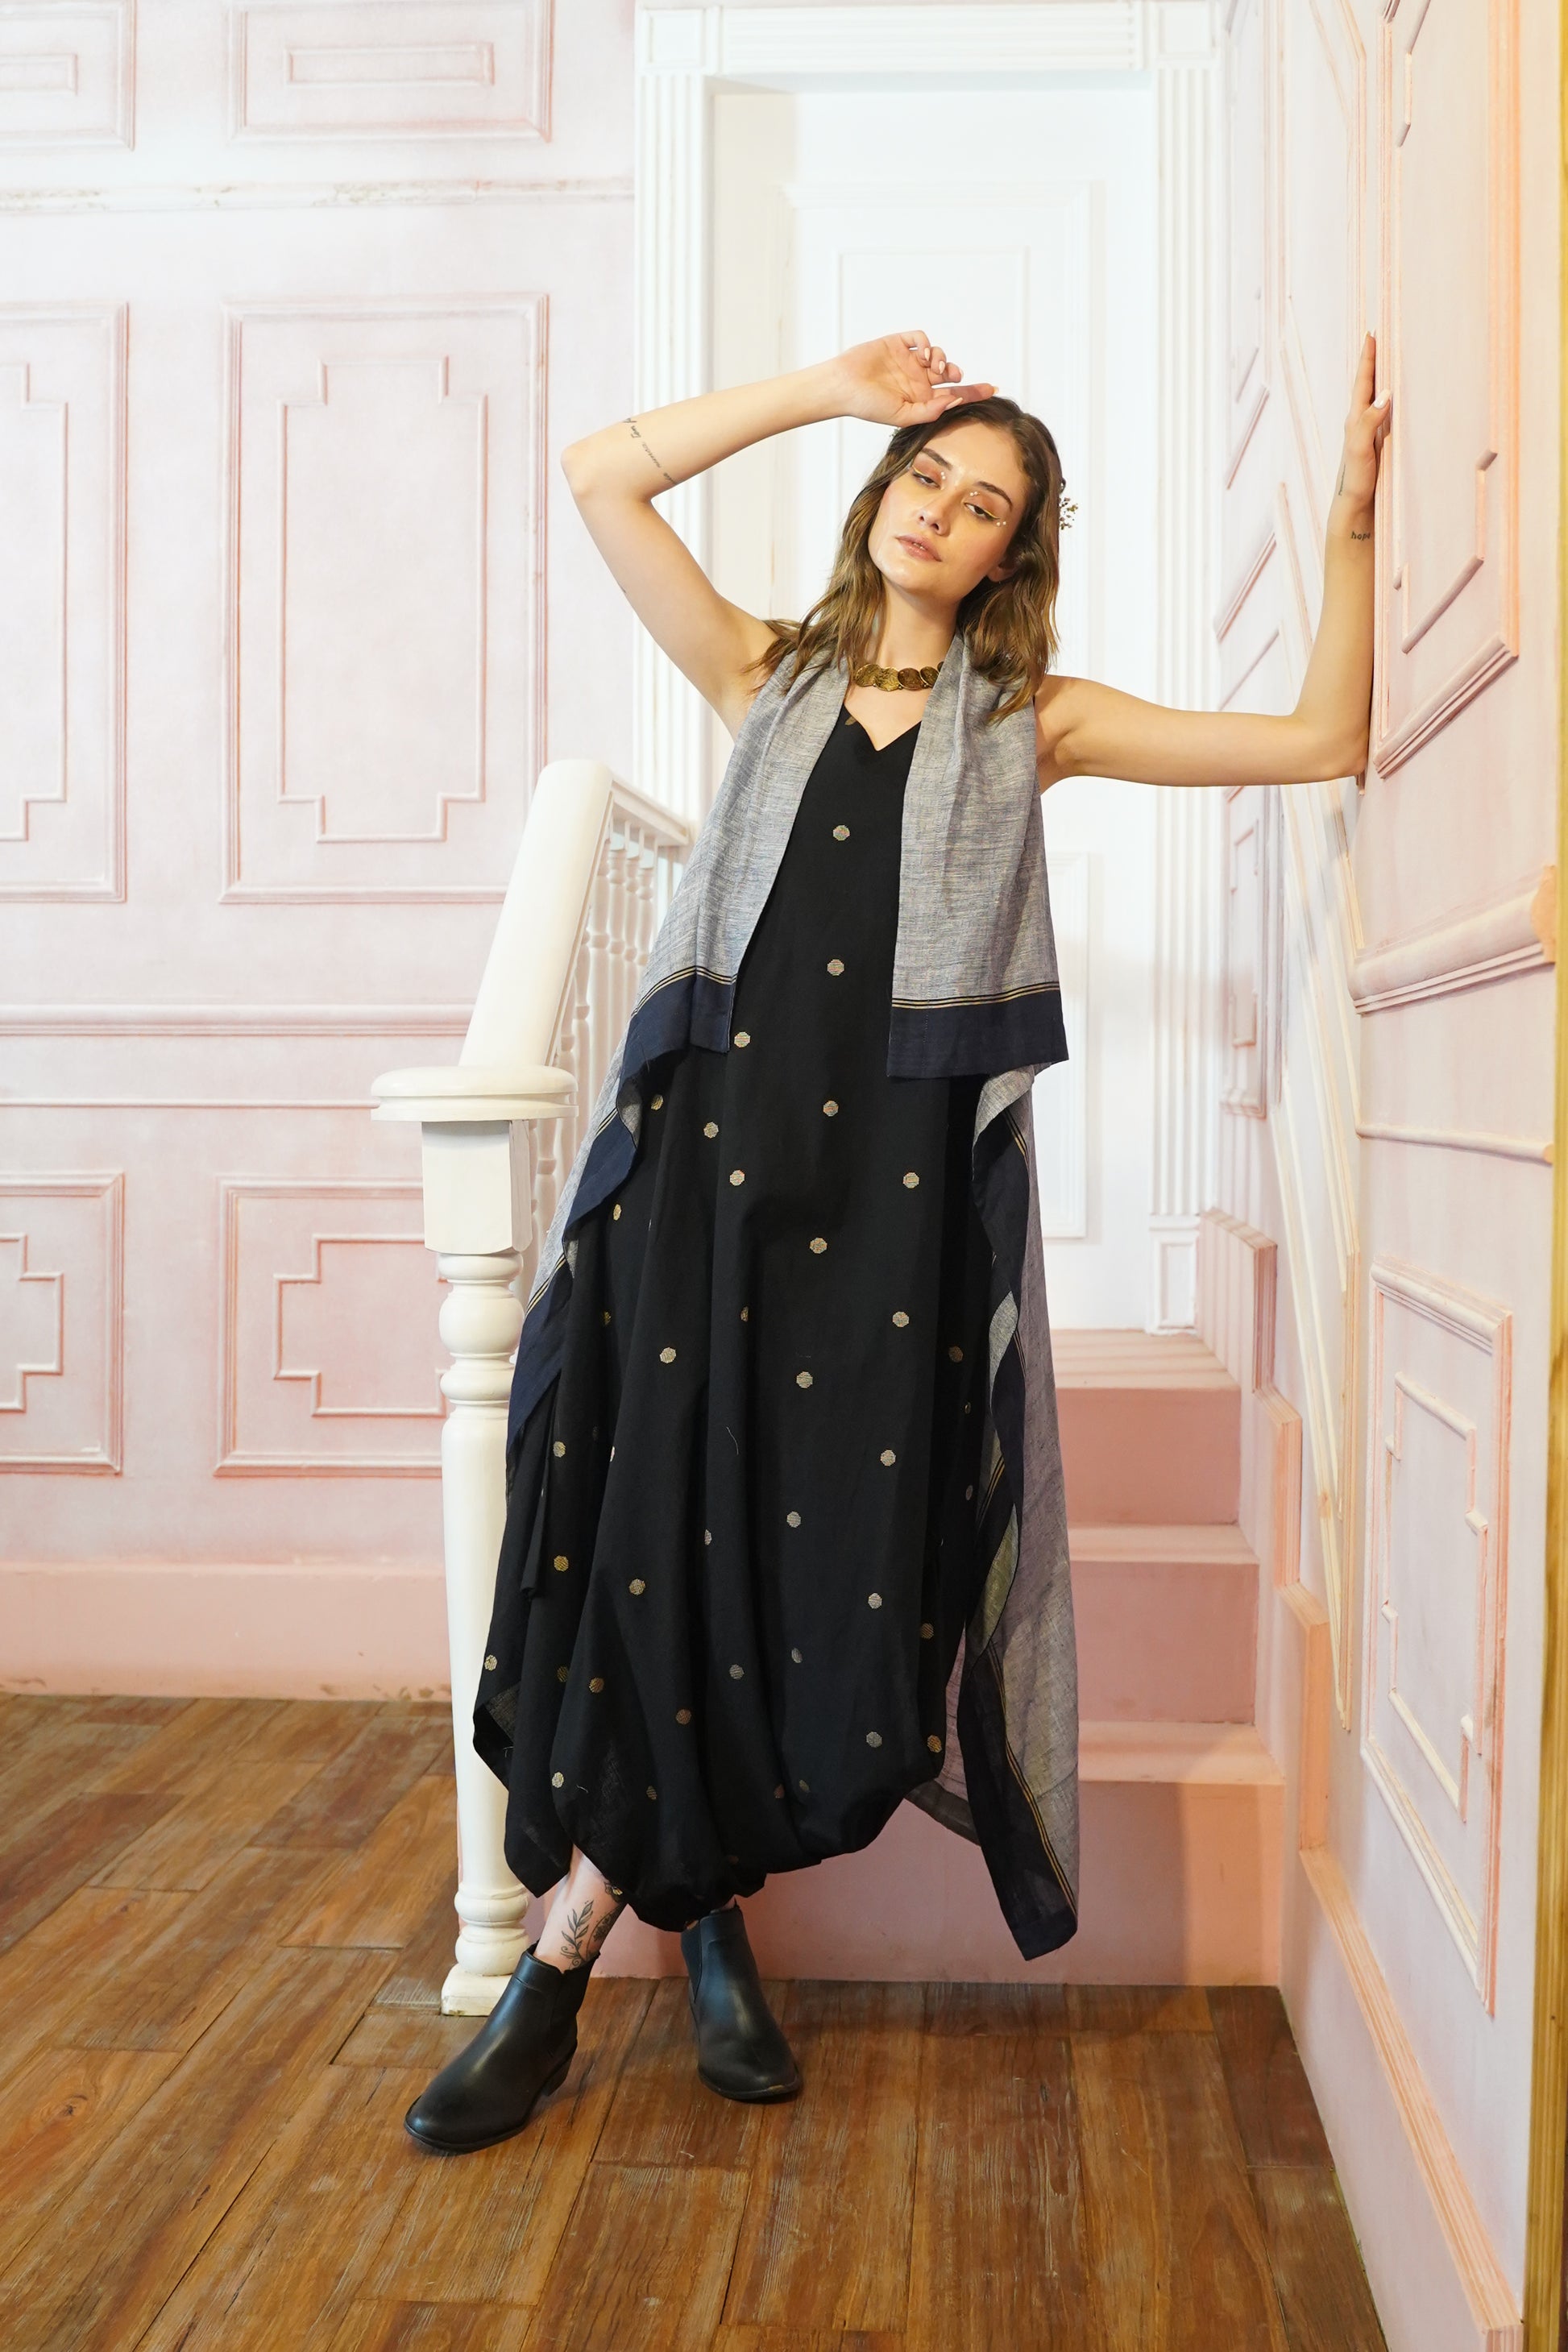 Terquois Navy Blue Polka Dot  with Grey LInen Jacket  Dress  Terquois Klothing   